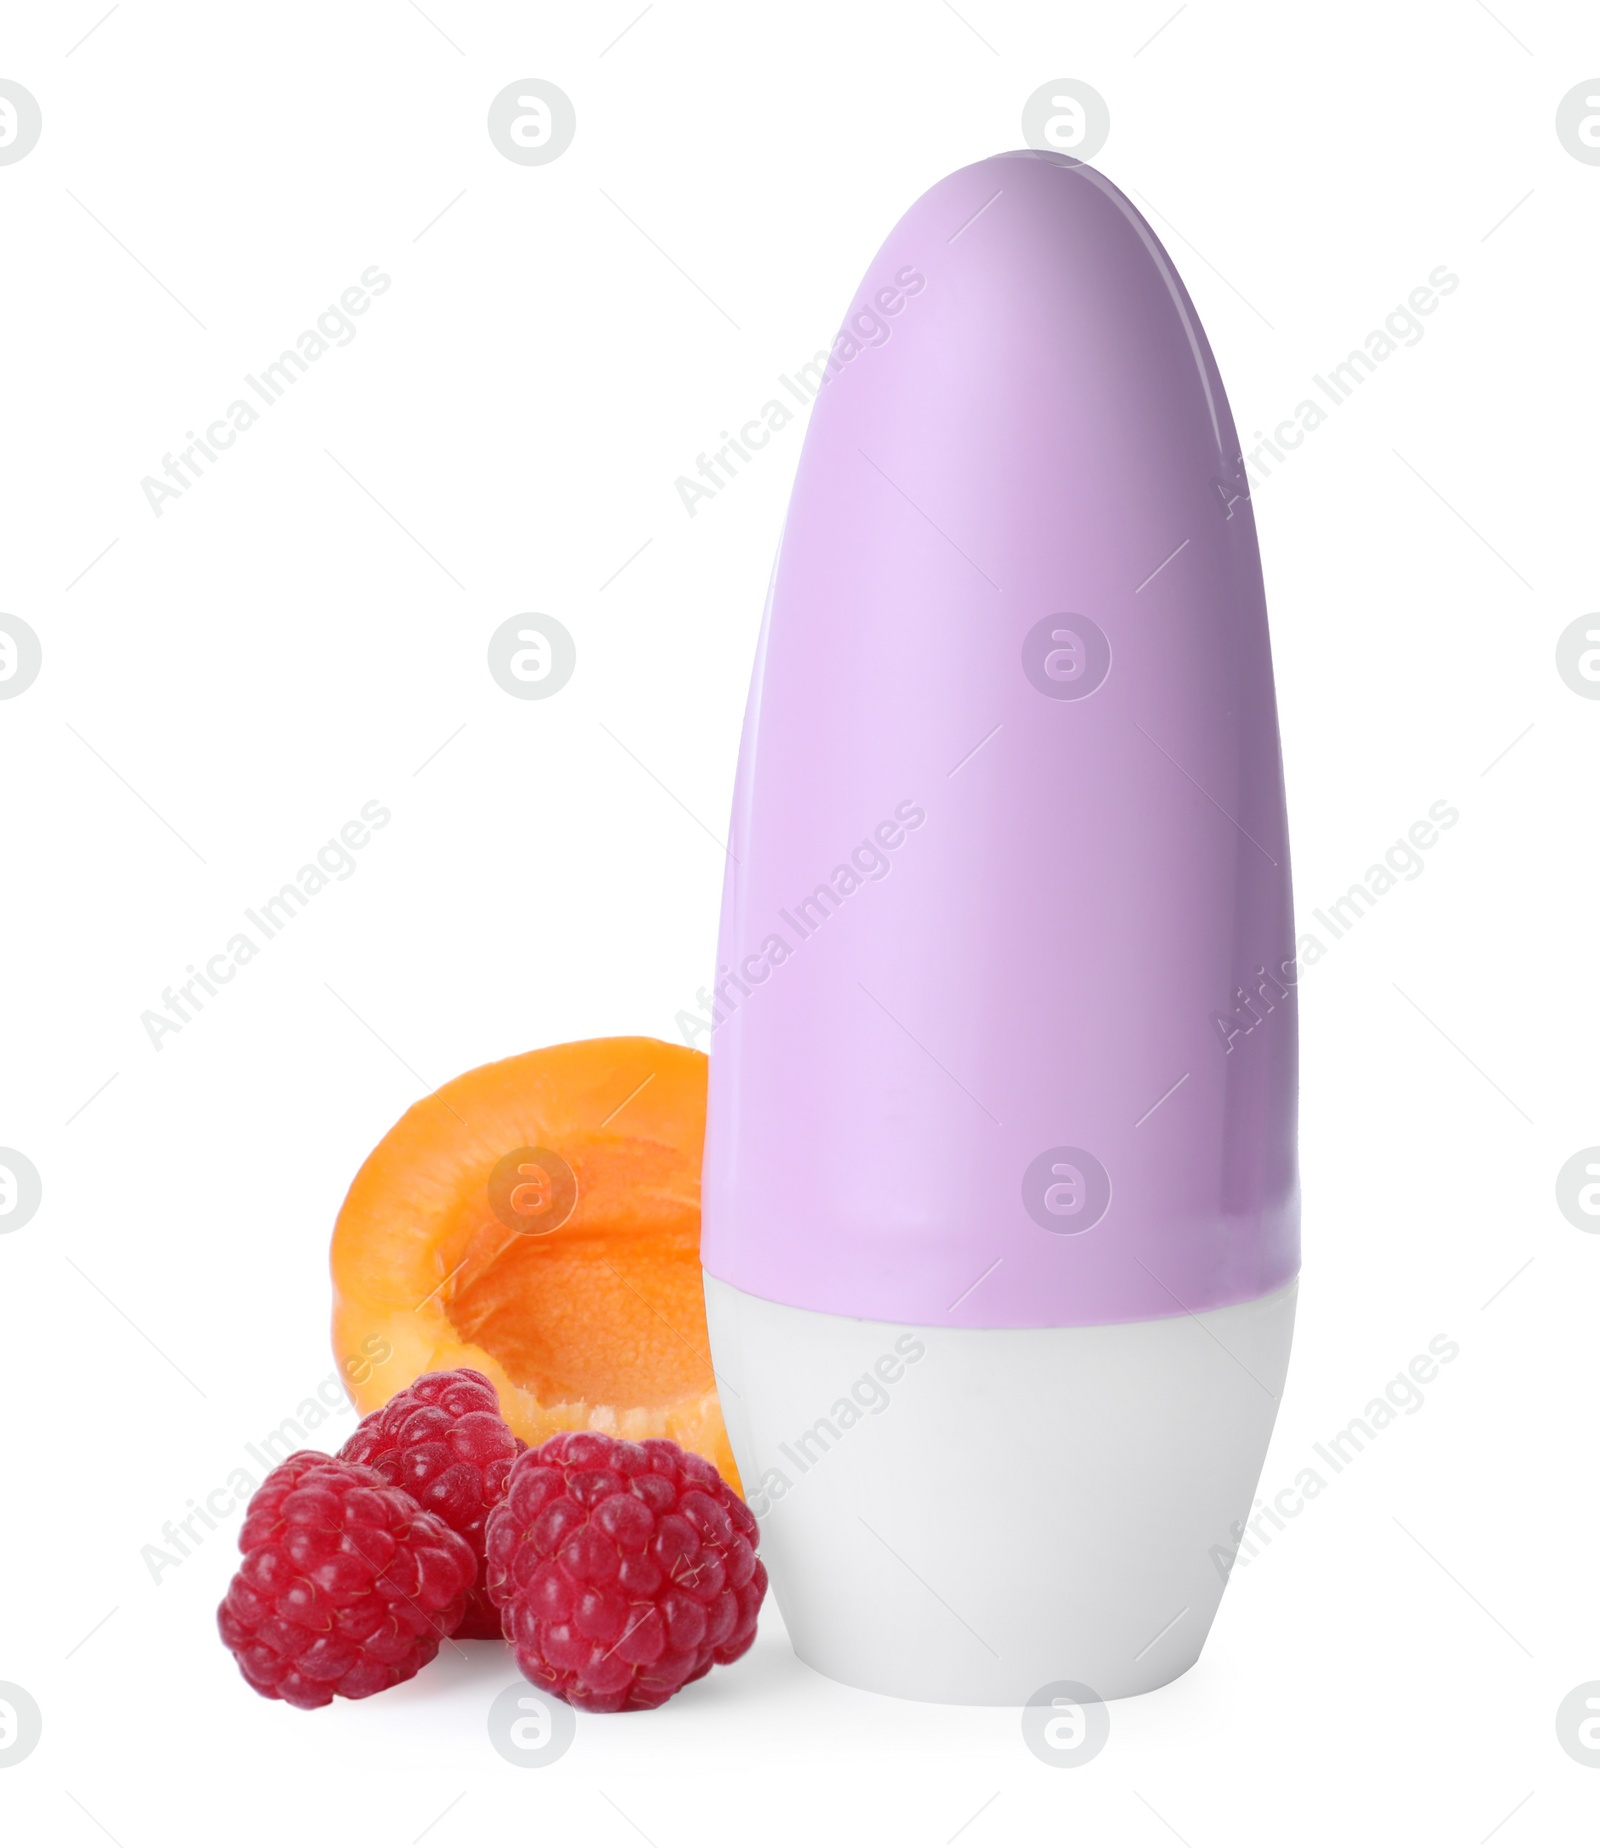 Photo of Natural female roll-on deodorant with fruits on white background